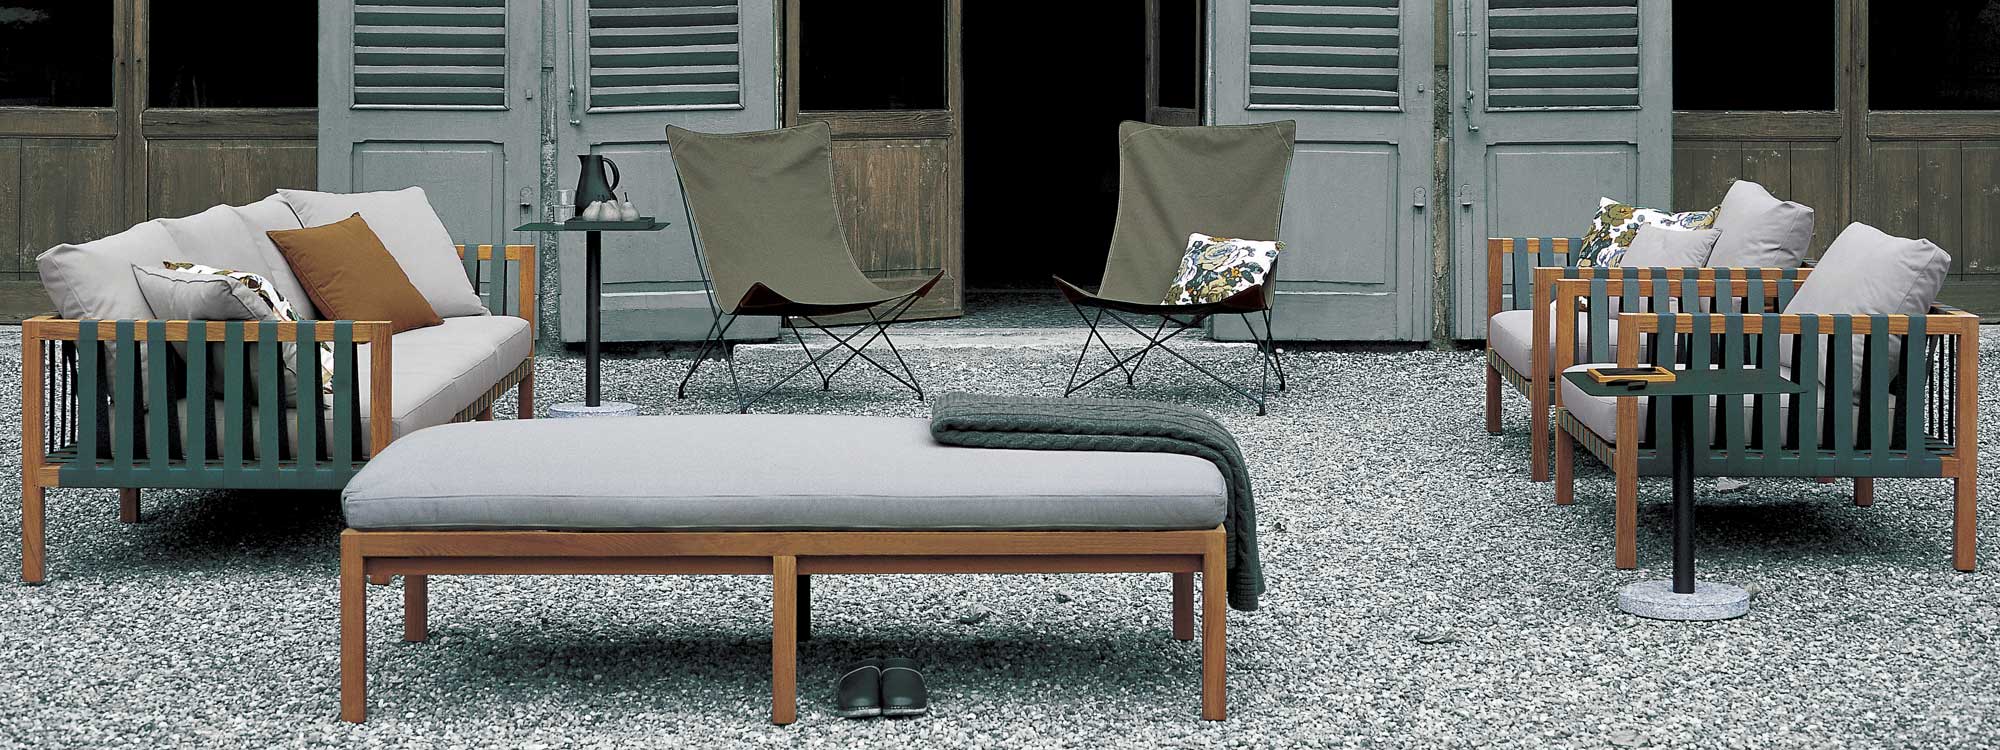 Mistral garden sofas with Lawrence garden easy chairs on gravel terrace